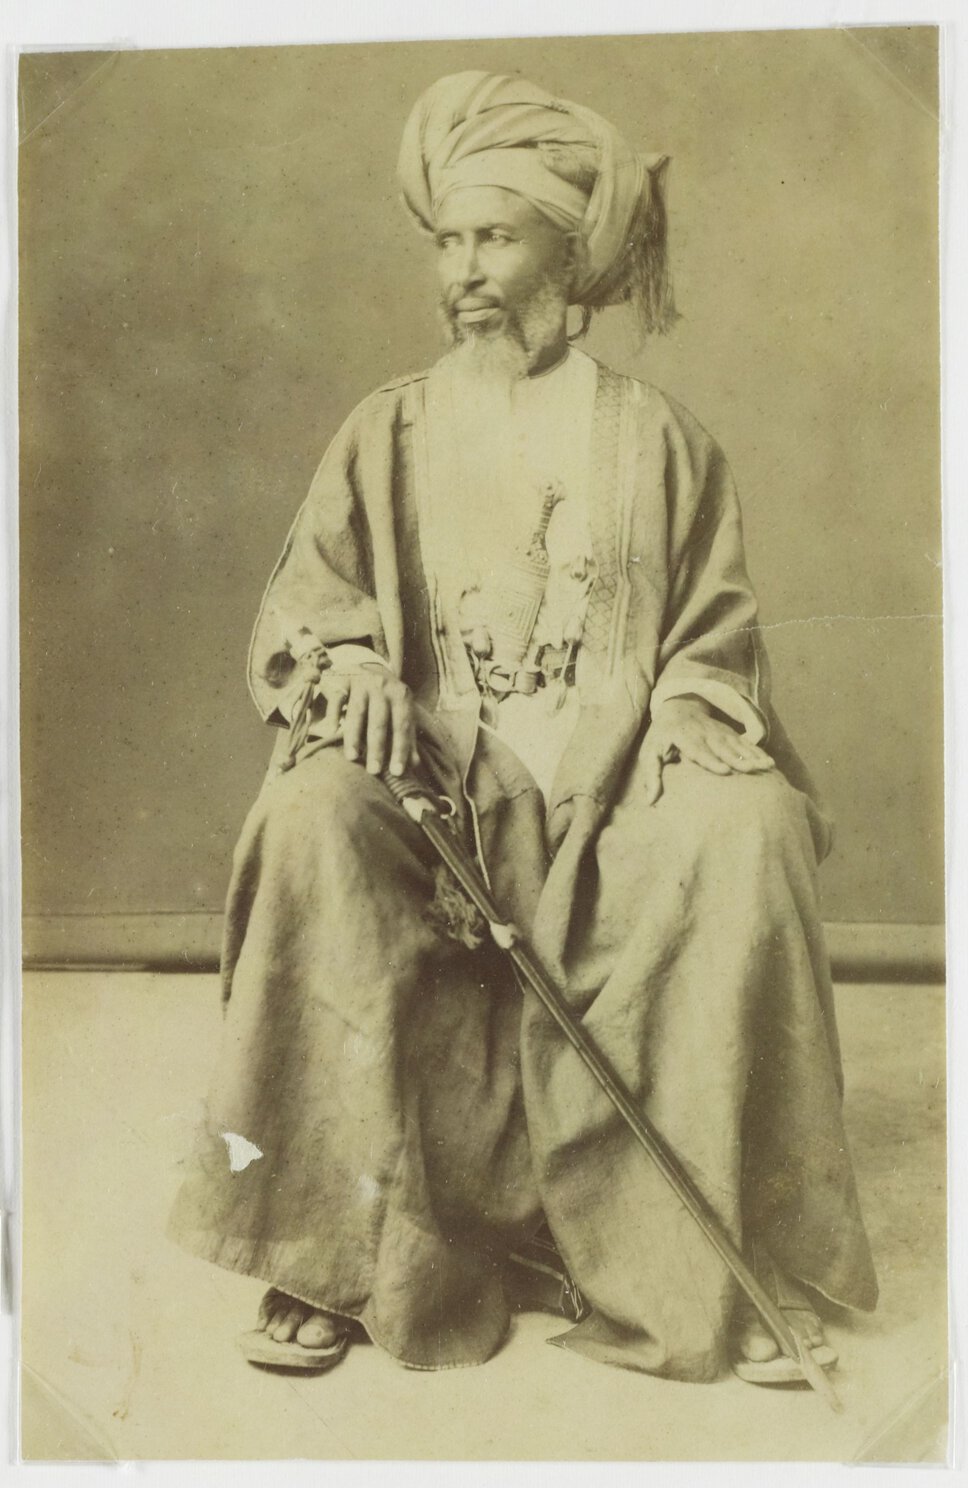 Tippu Tip, seated, looking to the right, holding a thin long sword.